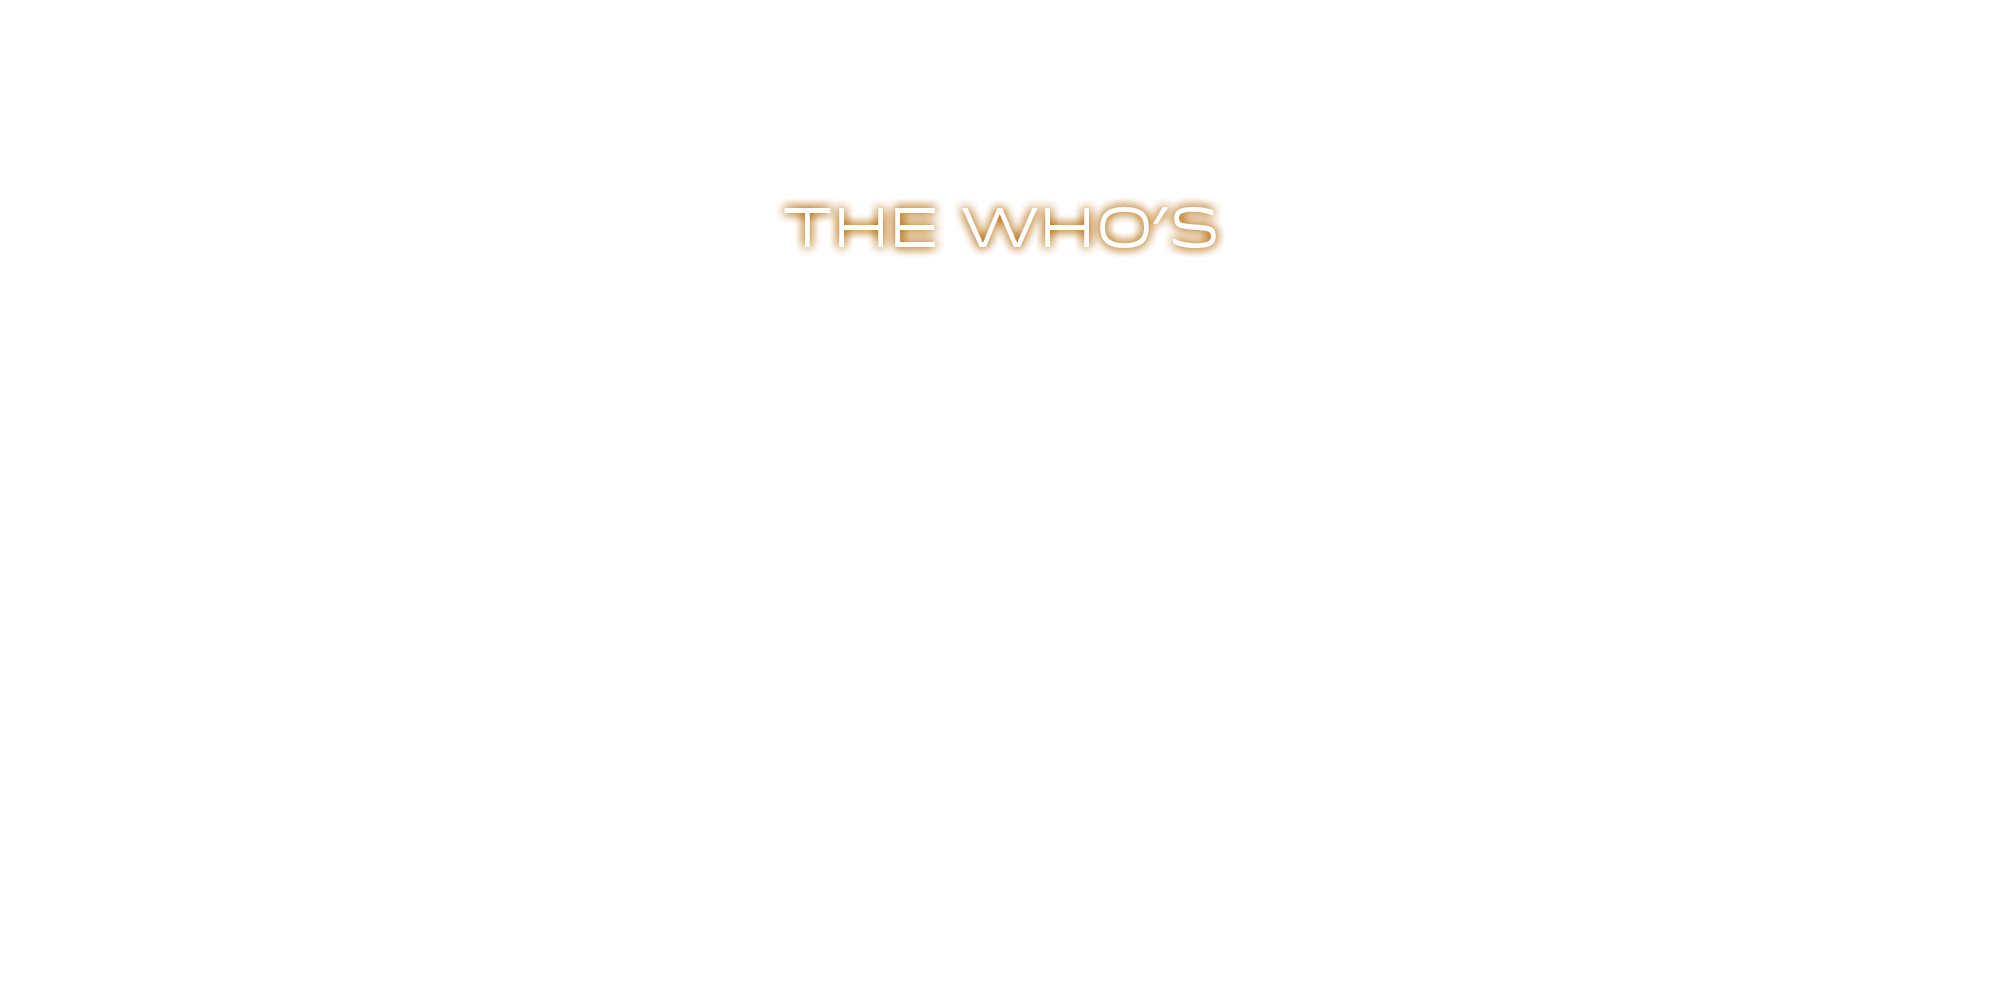 The Who's